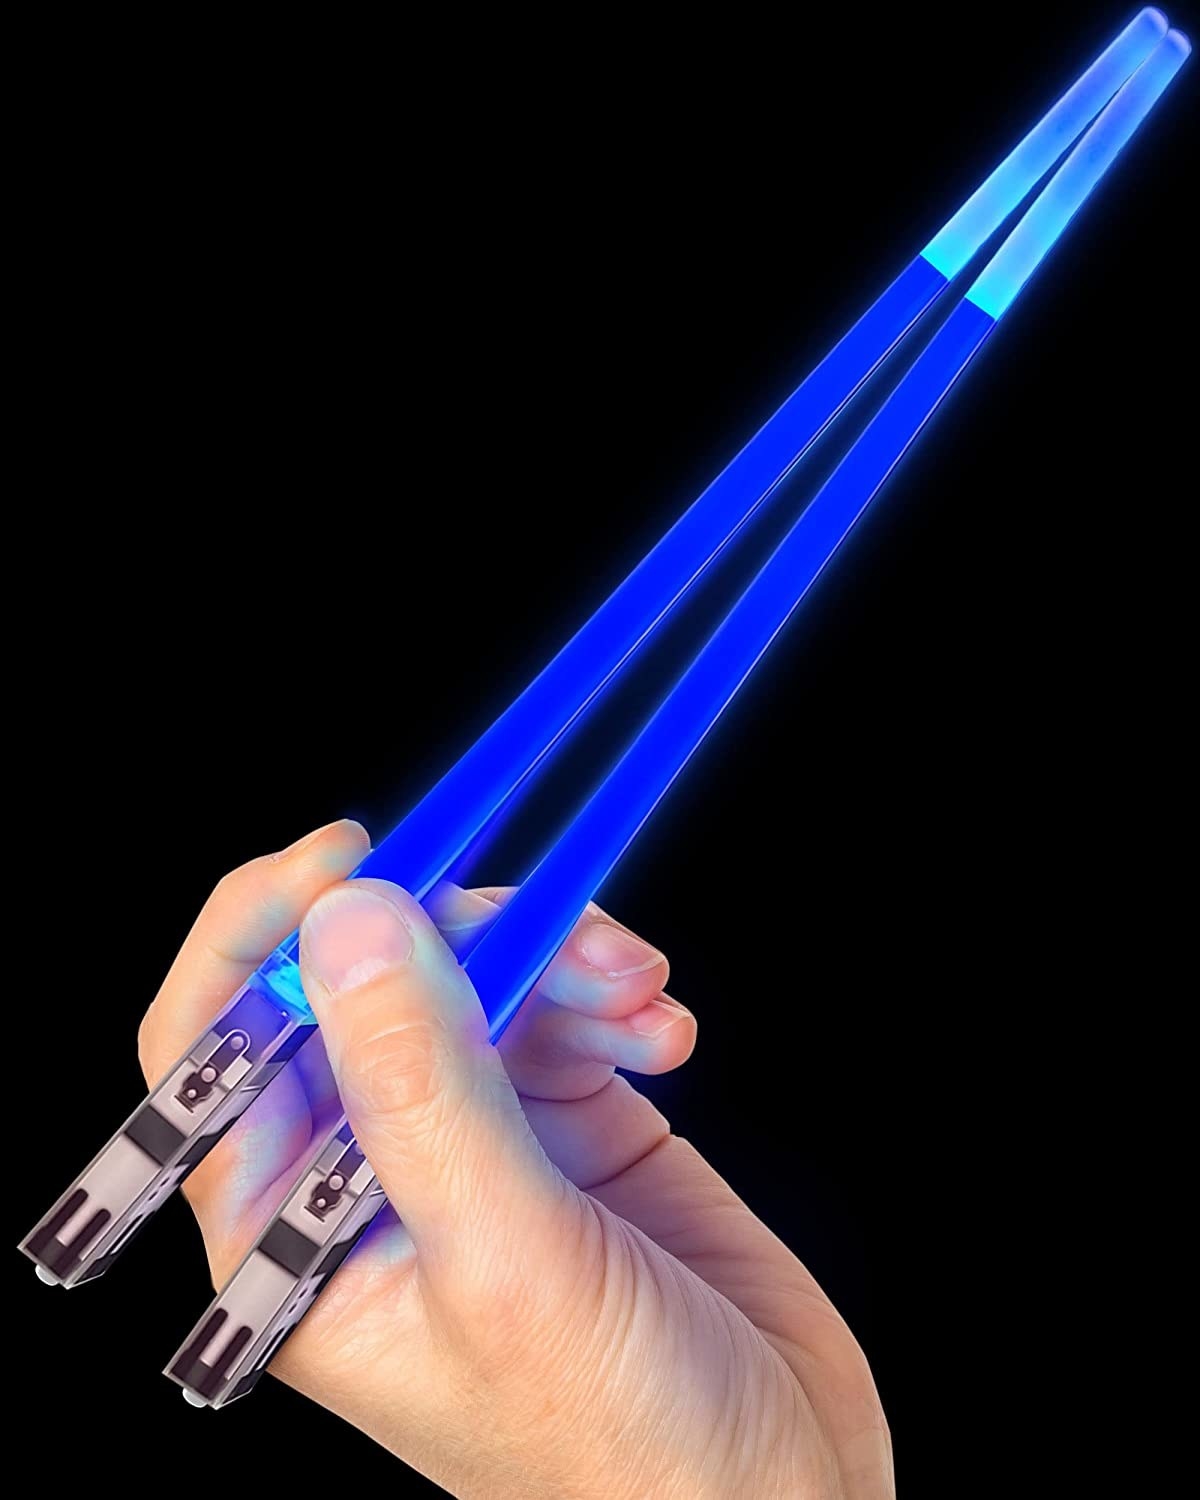 a person holding up the light up chop sticks in front of a dark background